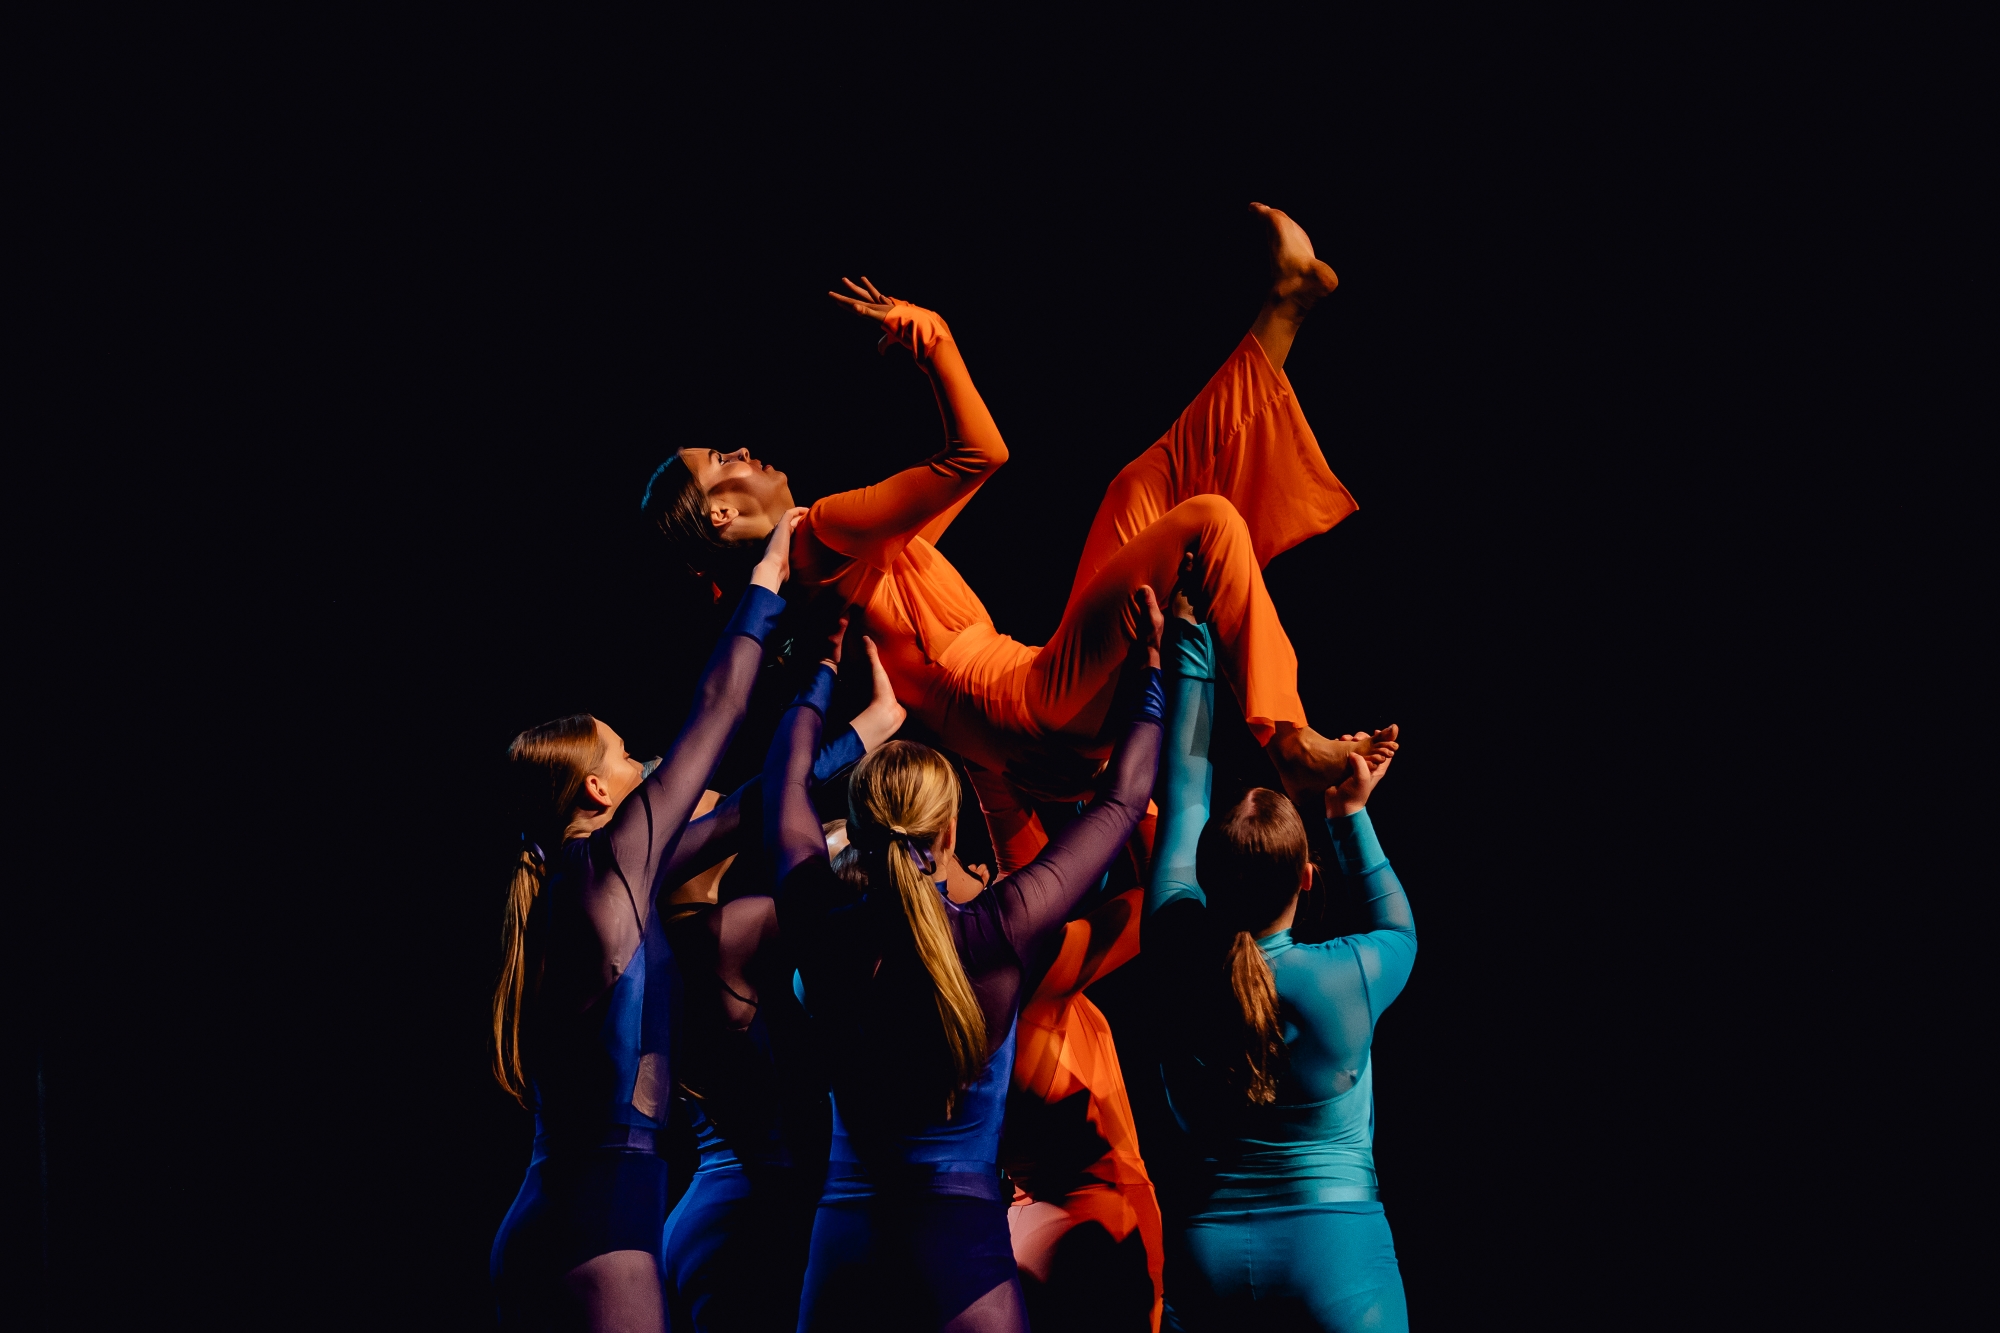 Wagga Wagga High School Senior dancers wearing vibrant chiffon jumsuits holding a student in the air